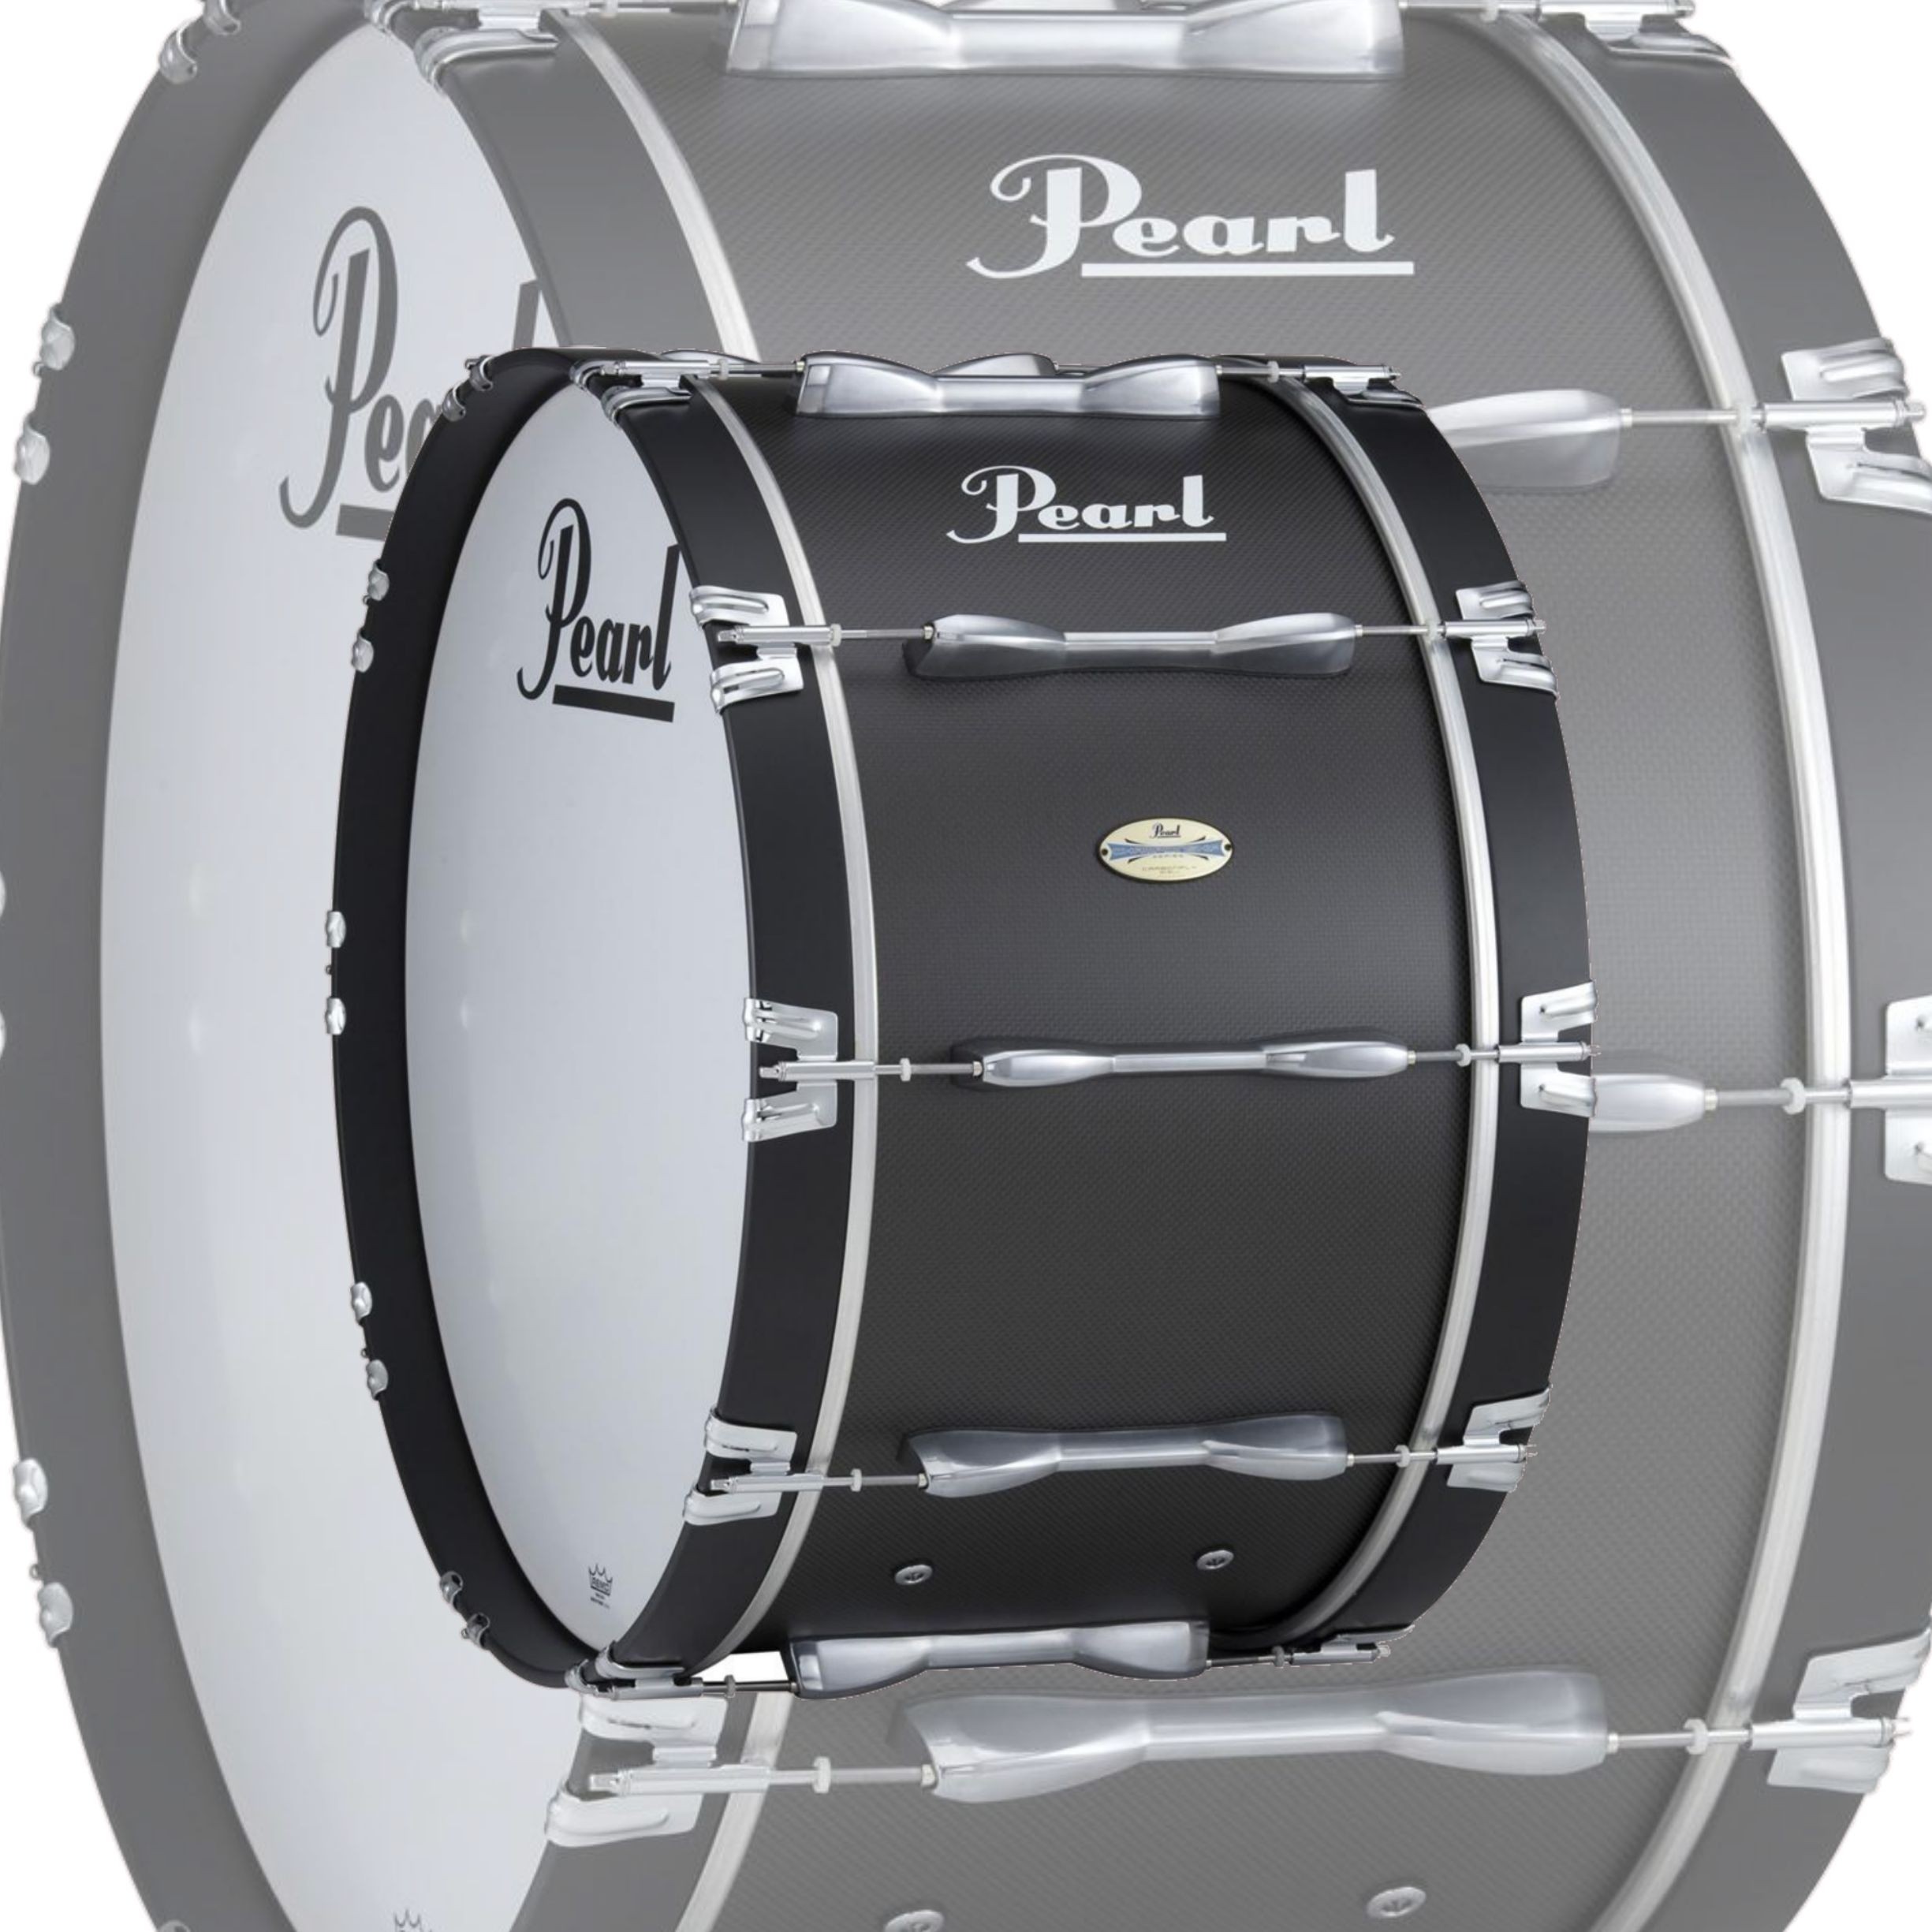 Pearl CarbonPly Championship 28"x14"  Marching Bass Drum